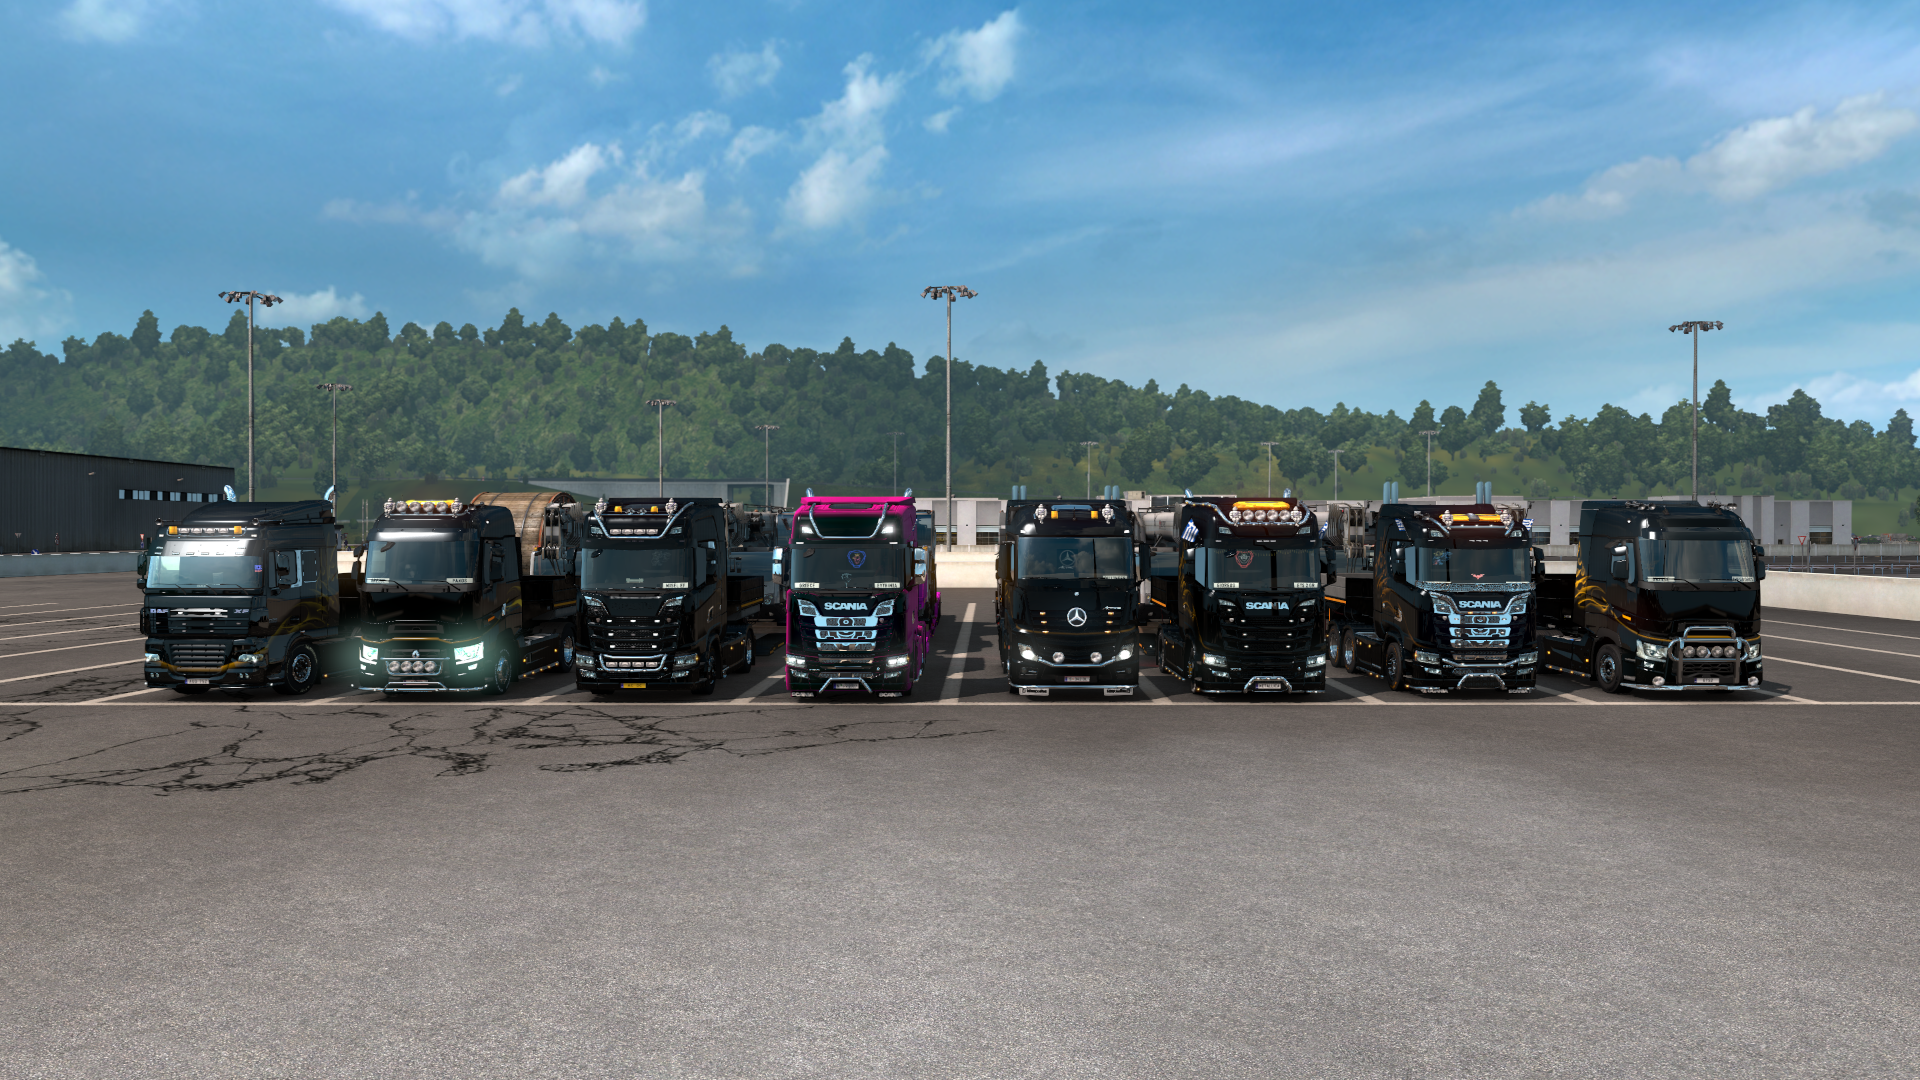 ets2_20210327_223508_00.png